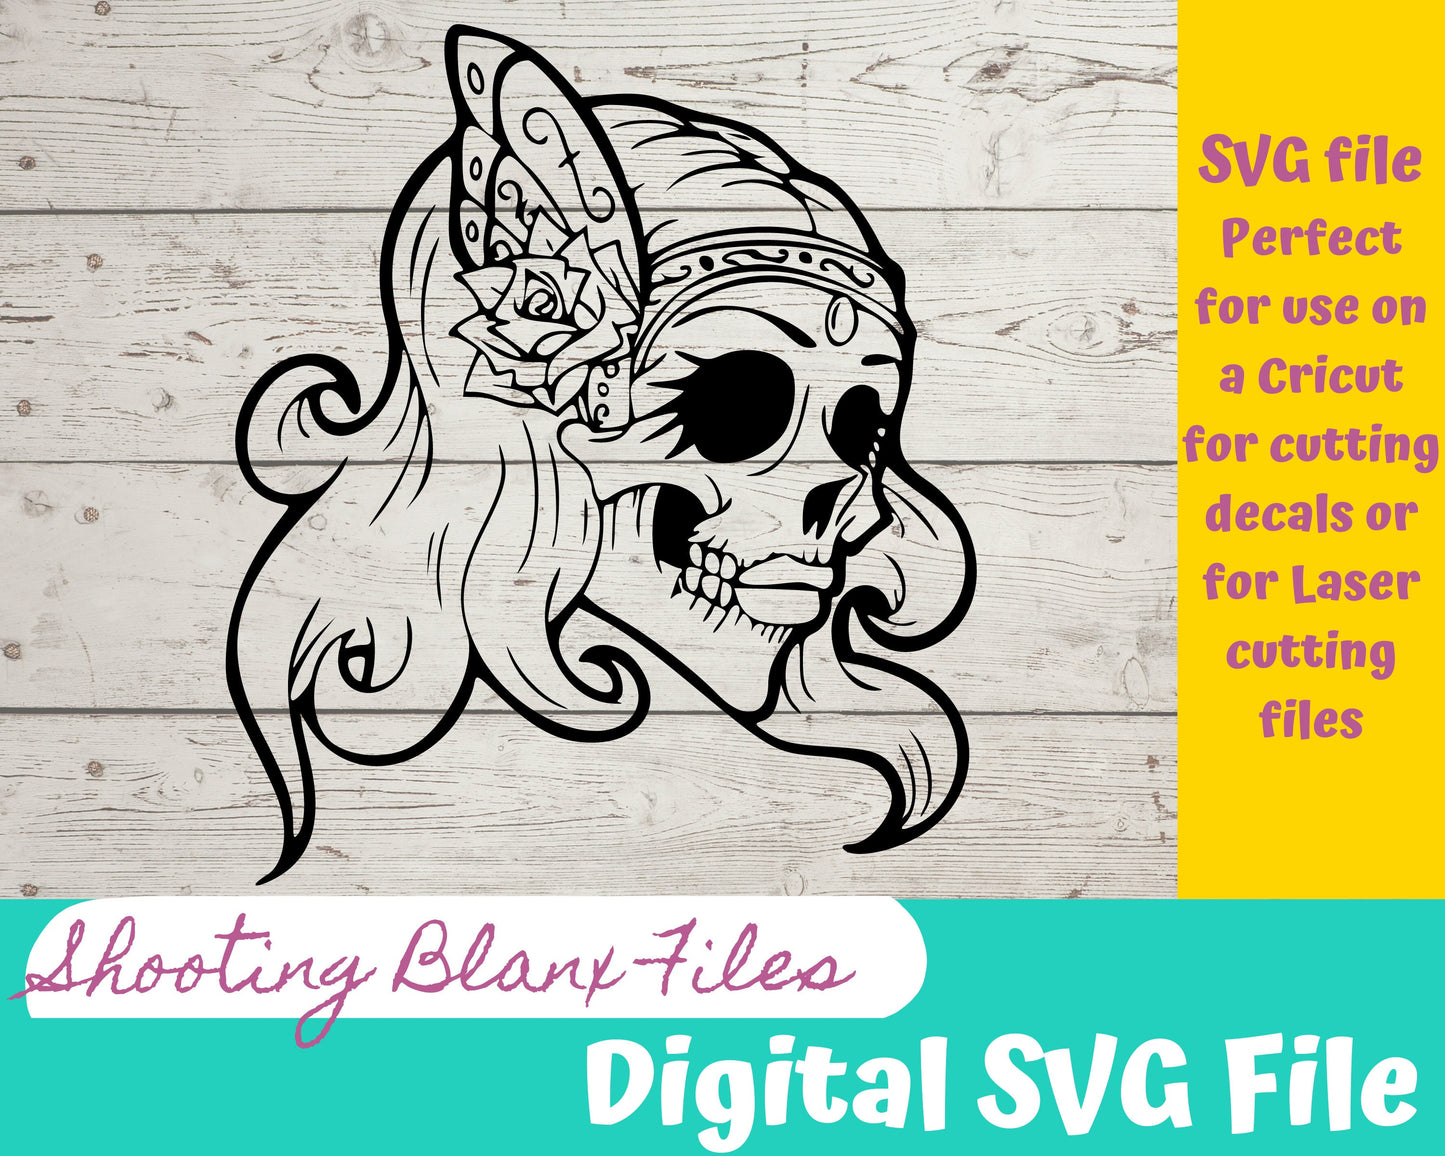 Sugar Skull SVG bundle #2 file perfect for Cricut, Cameo, or Silhouette also engraving Glowforge , cinco de mayo, may 5th, day of the dead